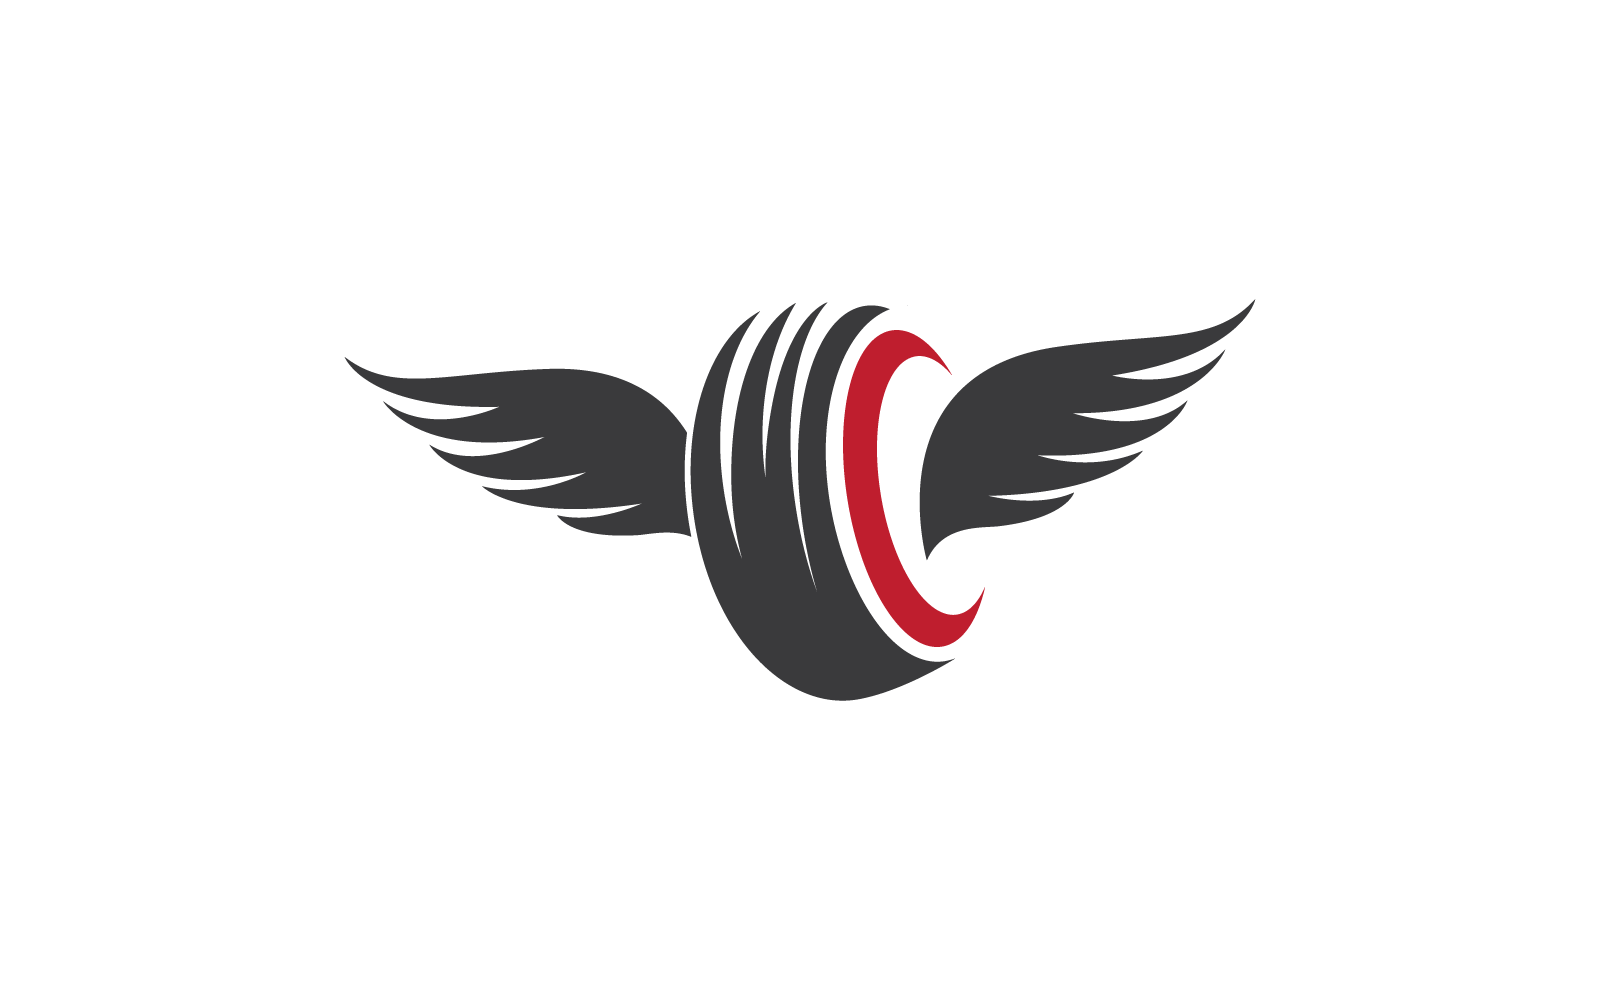 Tires and wing illustration vector logo template Logo Template